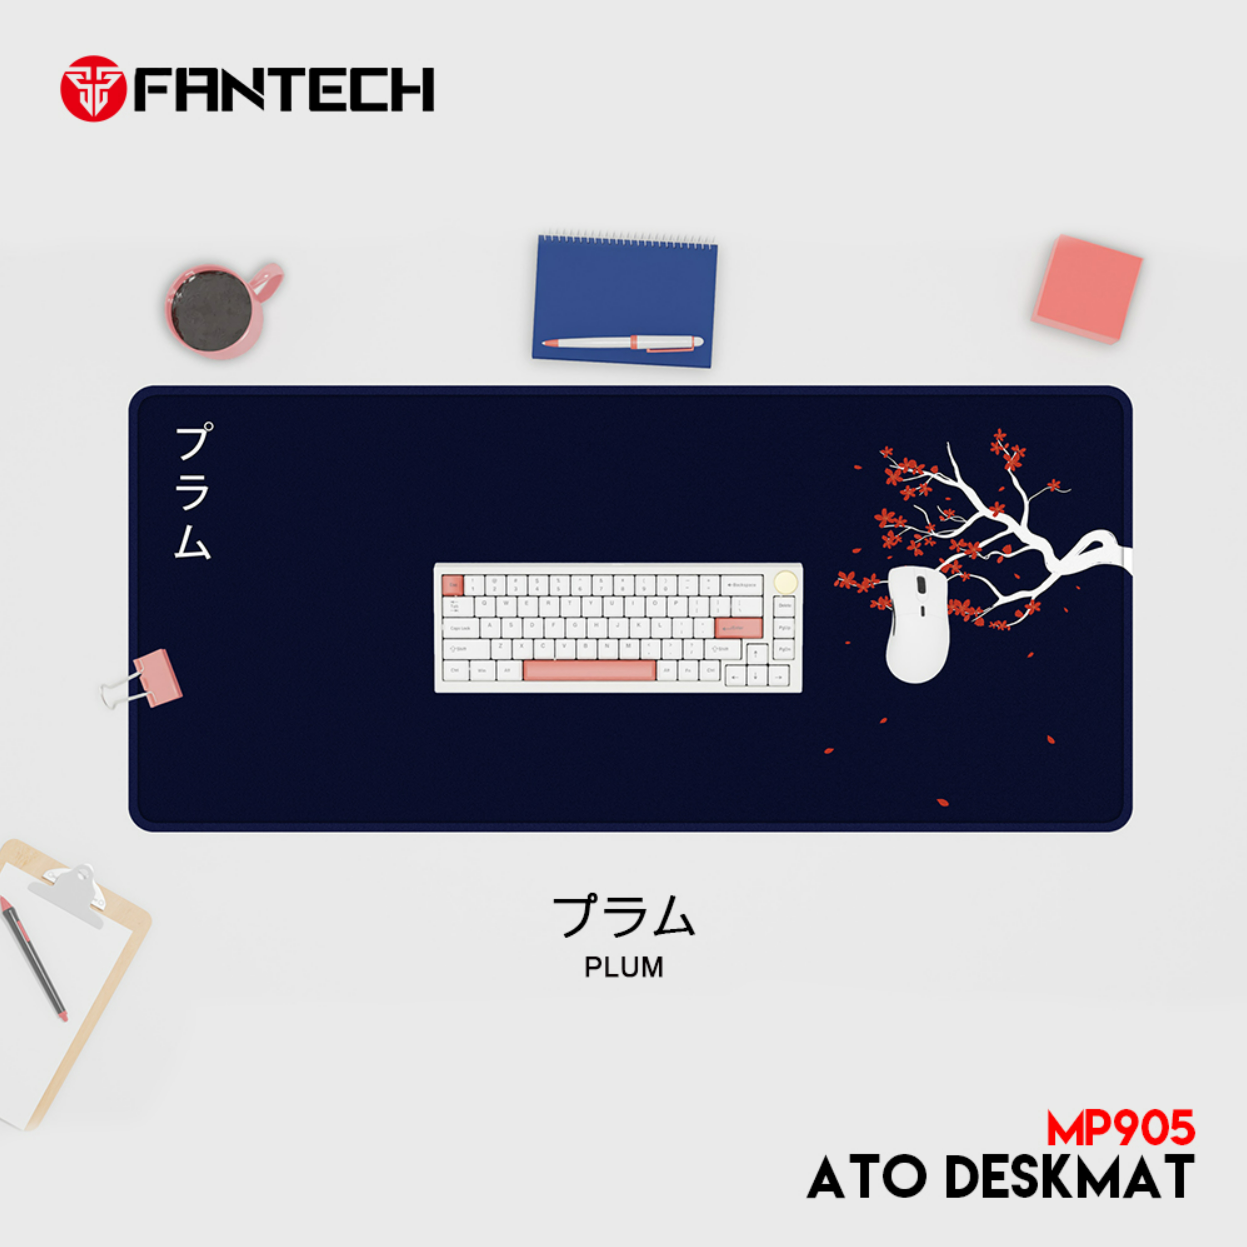 A large marketing image providing additional information about the product Fantech ATO MP905 Desk Mat - Plum - Additional alt info not provided